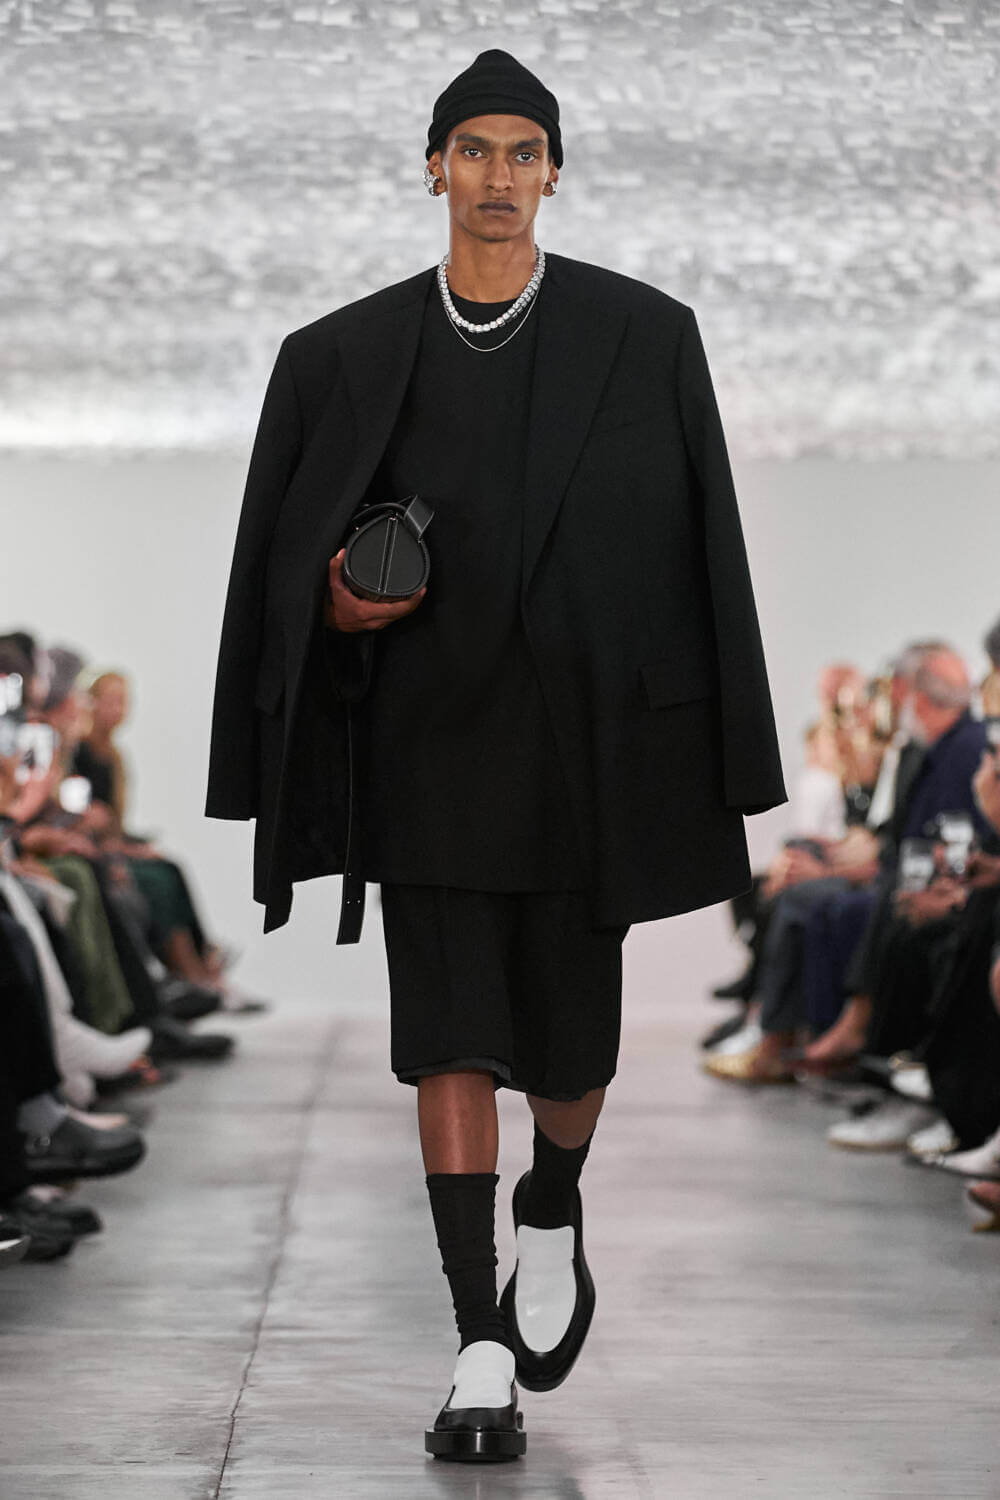 Four People on Why They Love Wearing Jil Sander's Clothes